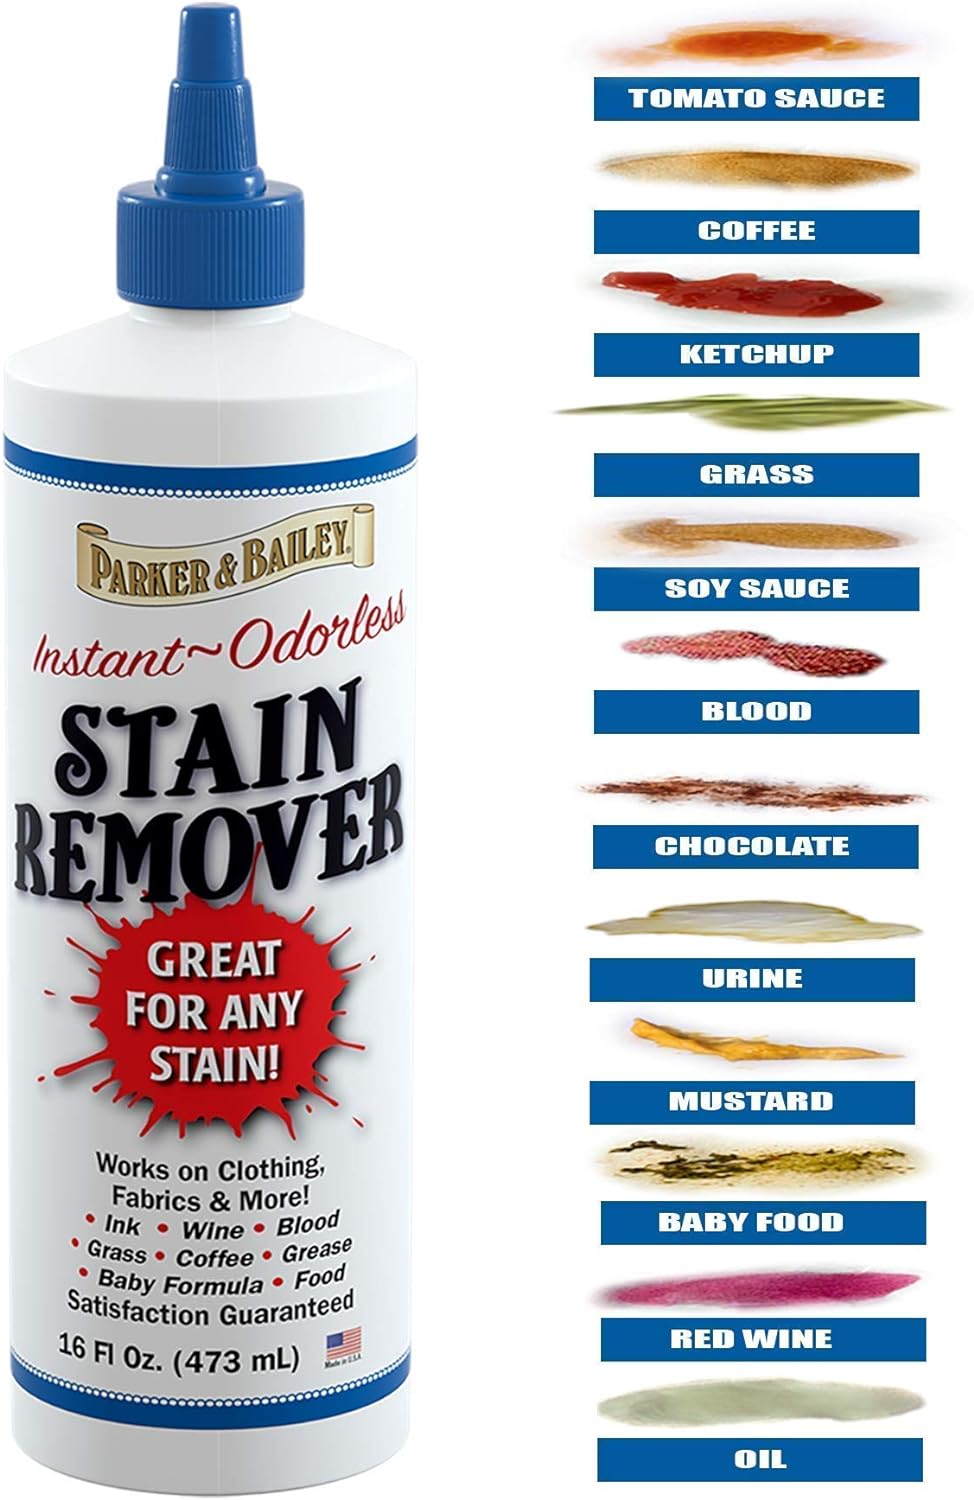 Parker and Bailey Stain Remover 16oz Bundled with Red Wine Stain Remover 8oz : Health & Household